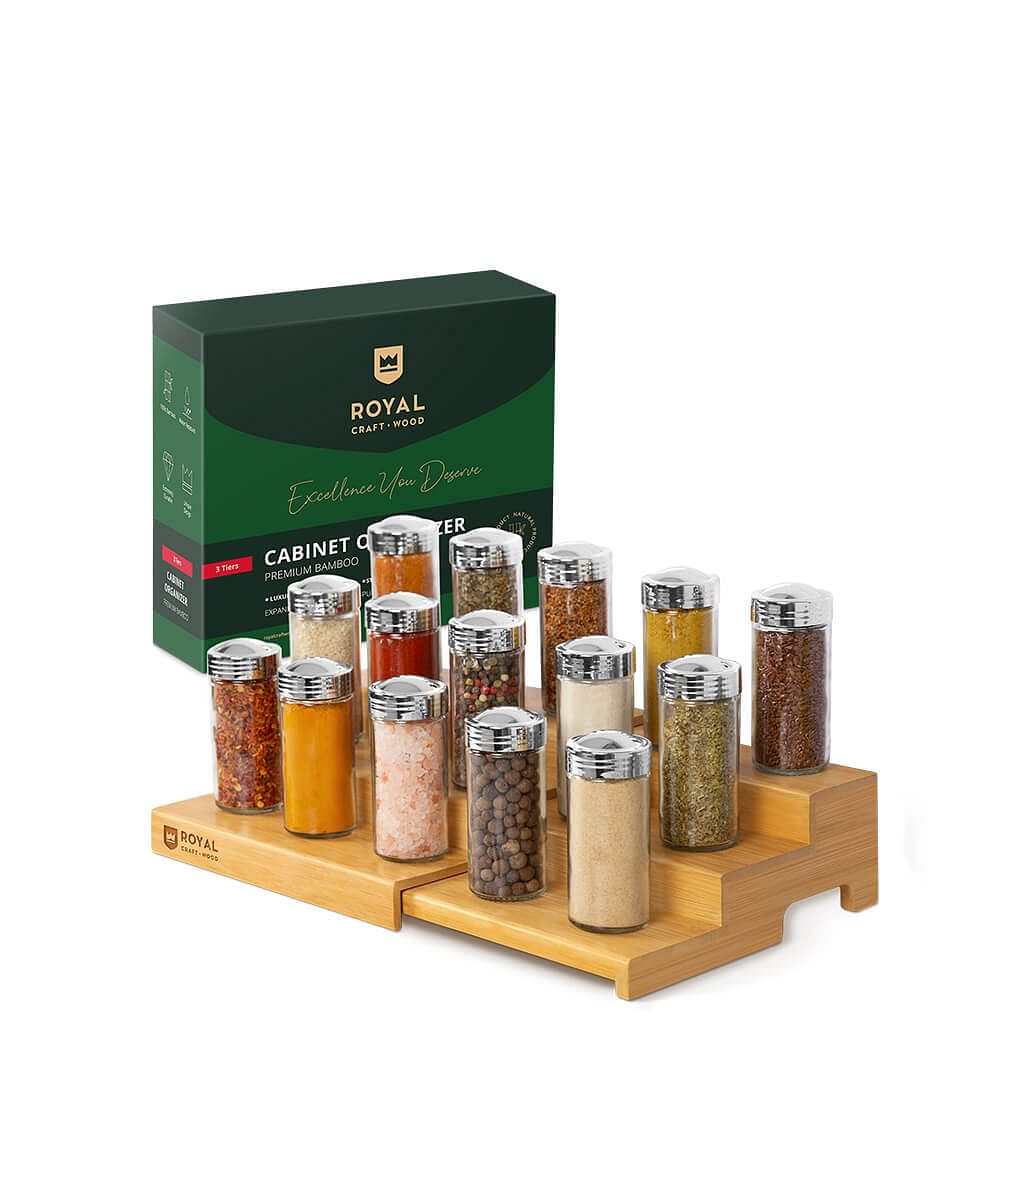 Royal Craft Wood Luxury Spice Drawer Organizer for Kitchen - Bamboo Spice Rack Organizer for Drawer for Deep Drawers (17x13.5)